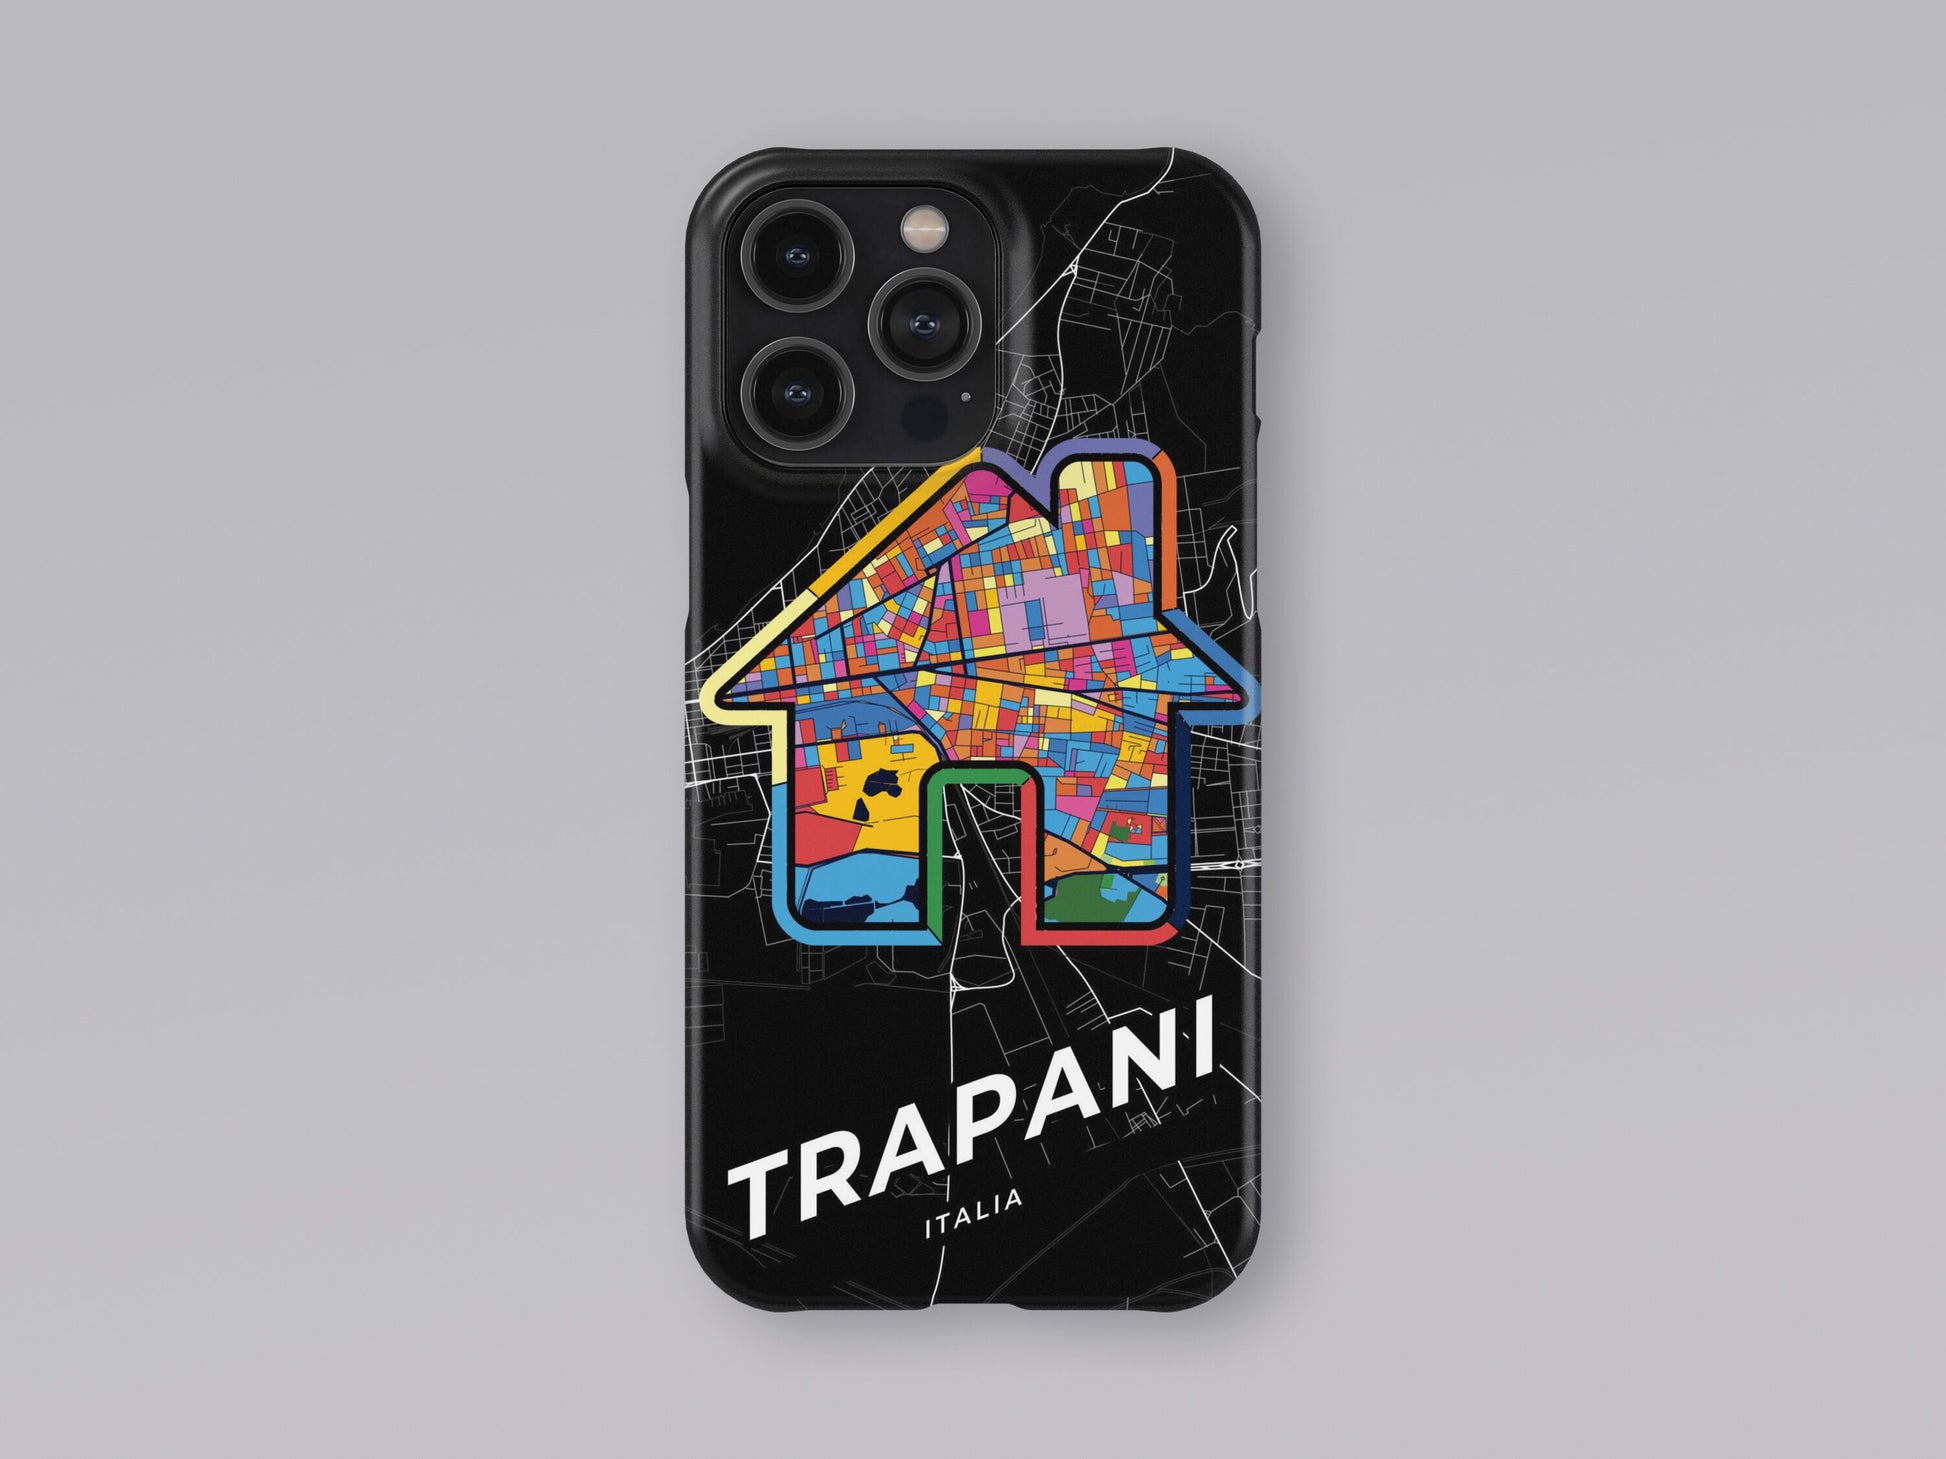 Trapani Italy slim phone case with colorful icon 3